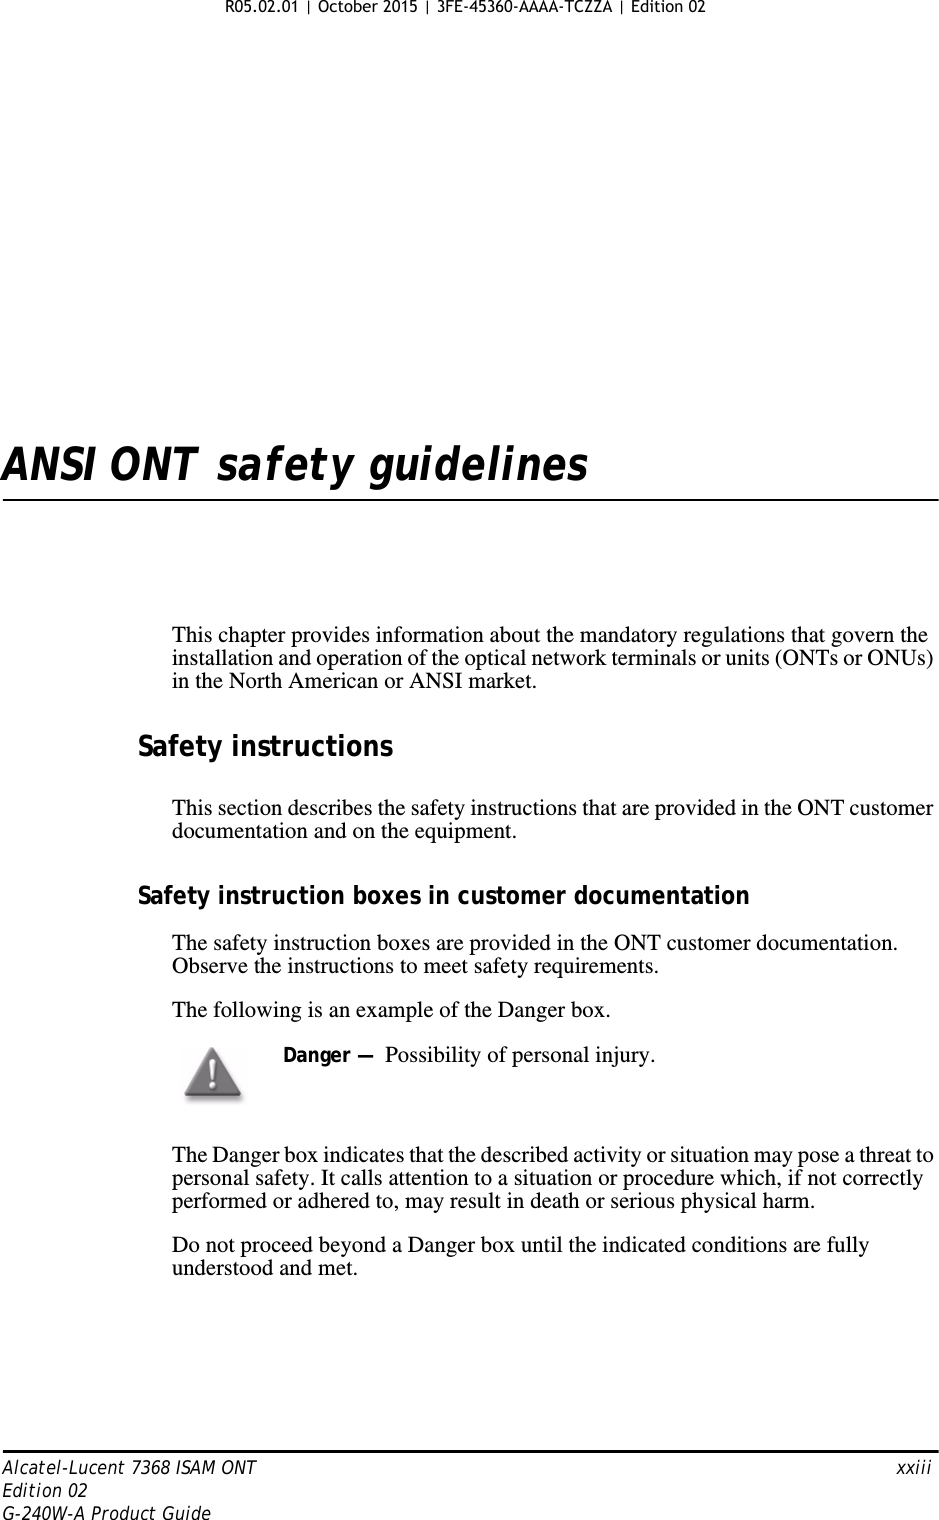 Alcatel-Lucent 7368 ISAM ONT   xxiiiEdition 02G-240W-A Product GuideANSI ONT safety guidelinesThis chapter provides information about the mandatory regulations that govern the installation and operation of the optical network terminals or units (ONTs or ONUs) in the North American or ANSI market.Safety instructionsThis section describes the safety instructions that are provided in the ONT customer documentation and on the equipment.Safety instruction boxes in customer documentationThe safety instruction boxes are provided in the ONT customer documentation. Observe the instructions to meet safety requirements.The following is an example of the Danger box.The Danger box indicates that the described activity or situation may pose a threat to personal safety. It calls attention to a situation or procedure which, if not correctly performed or adhered to, may result in death or serious physical harm. Do not proceed beyond a Danger box until the indicated conditions are fully understood and met.Danger —  Possibility of personal injury.  R05.02.01 | October 2015 | 3FE-45360-AAAA-TCZZA | Edition 02 